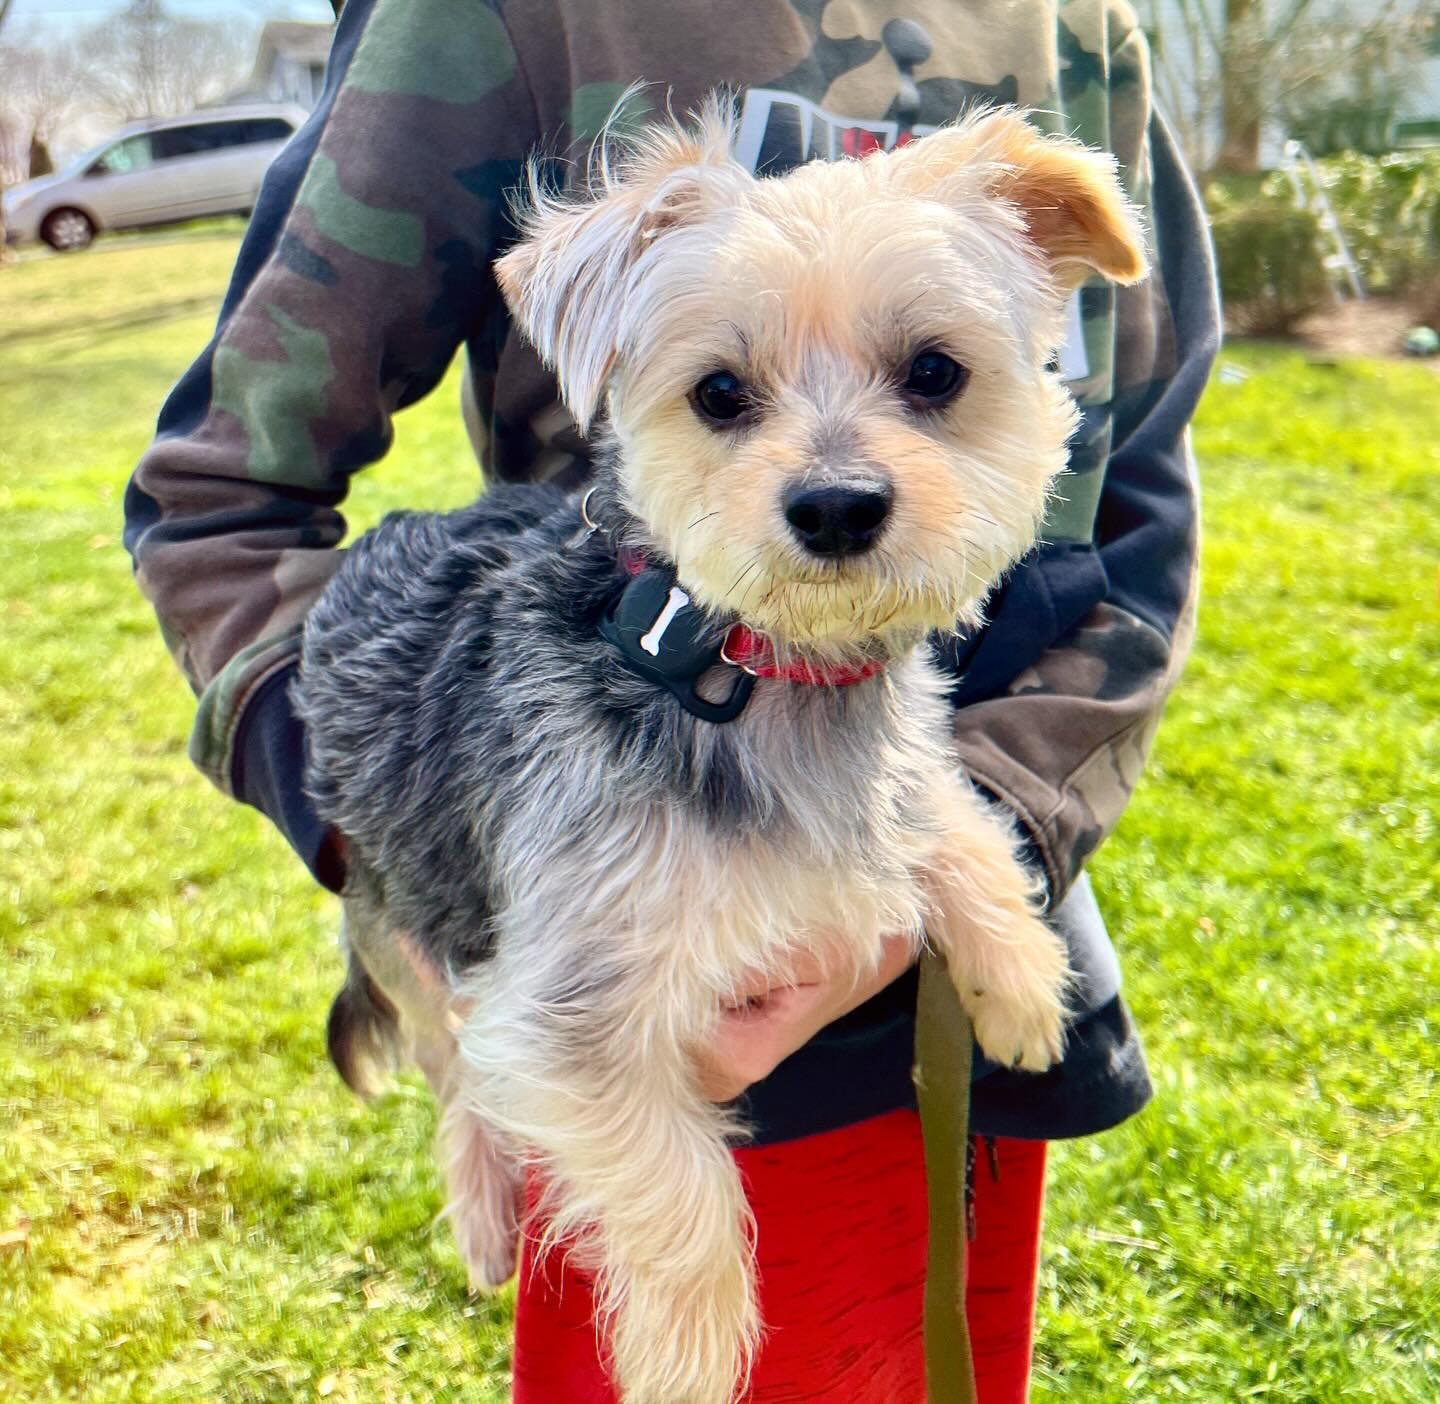 ADOPTED &bull; Remember our friend Vinny? Last we posted, we took in this adorable 3-5 year old, 8 pound Yorkie as a medical case and asked for donations to help with his FHO surgery. Because of your donations, this sweet boy is recovering from surge